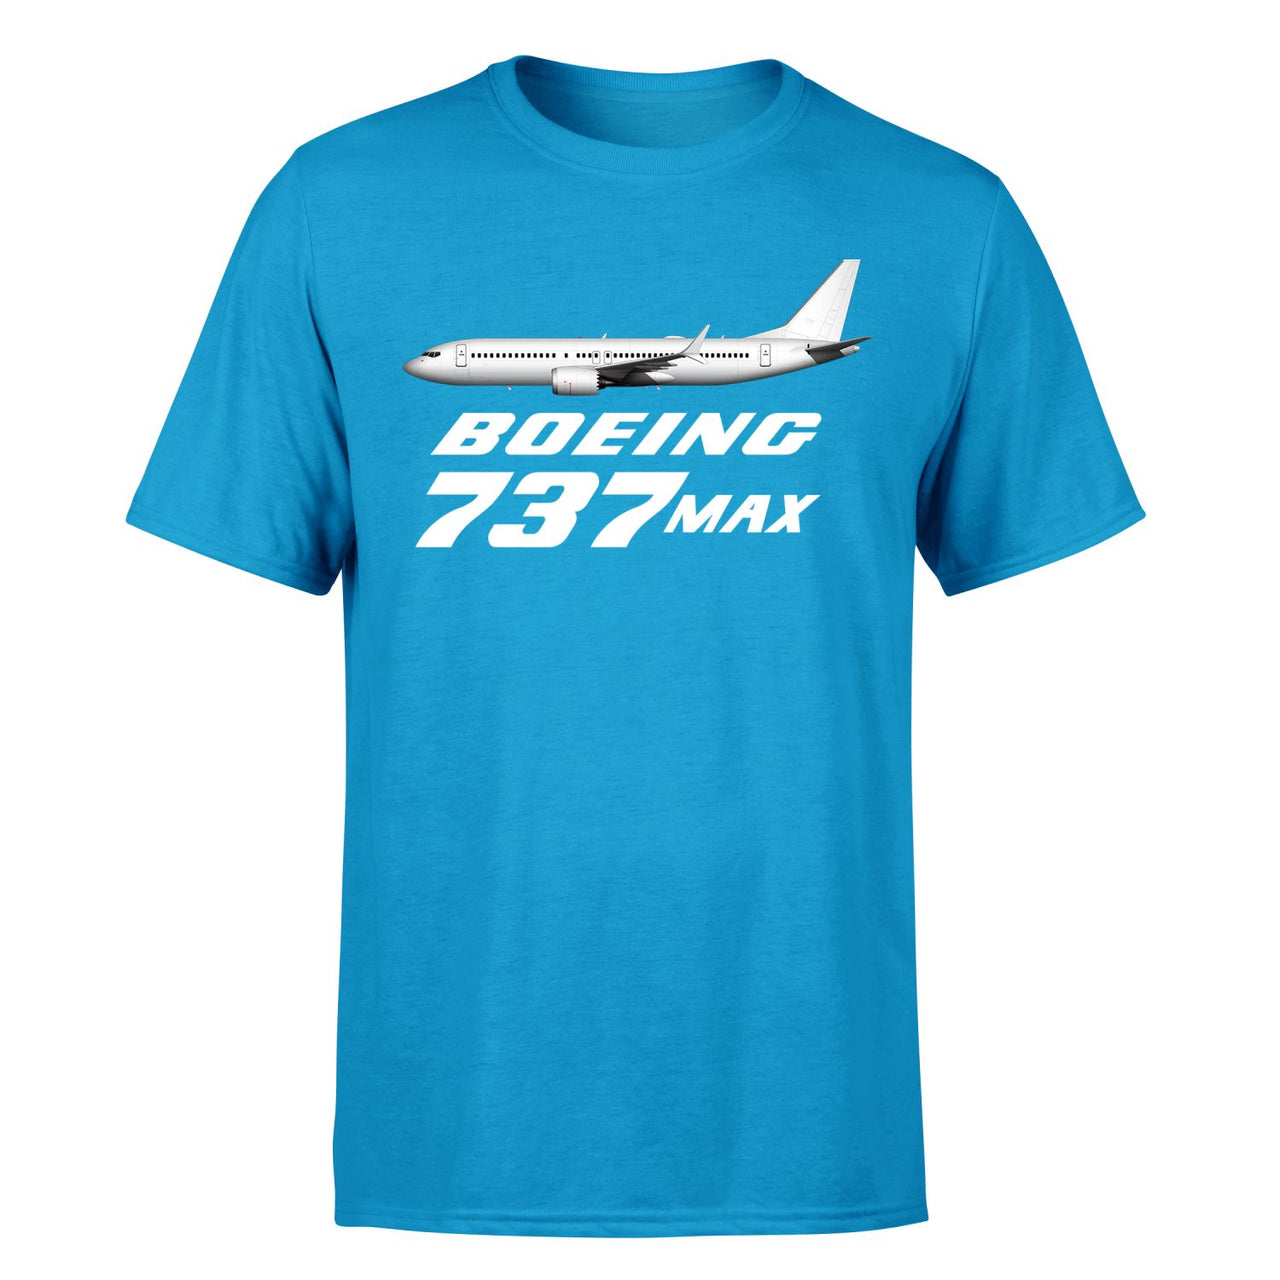 The Boeing 737Max Designed T-Shirts